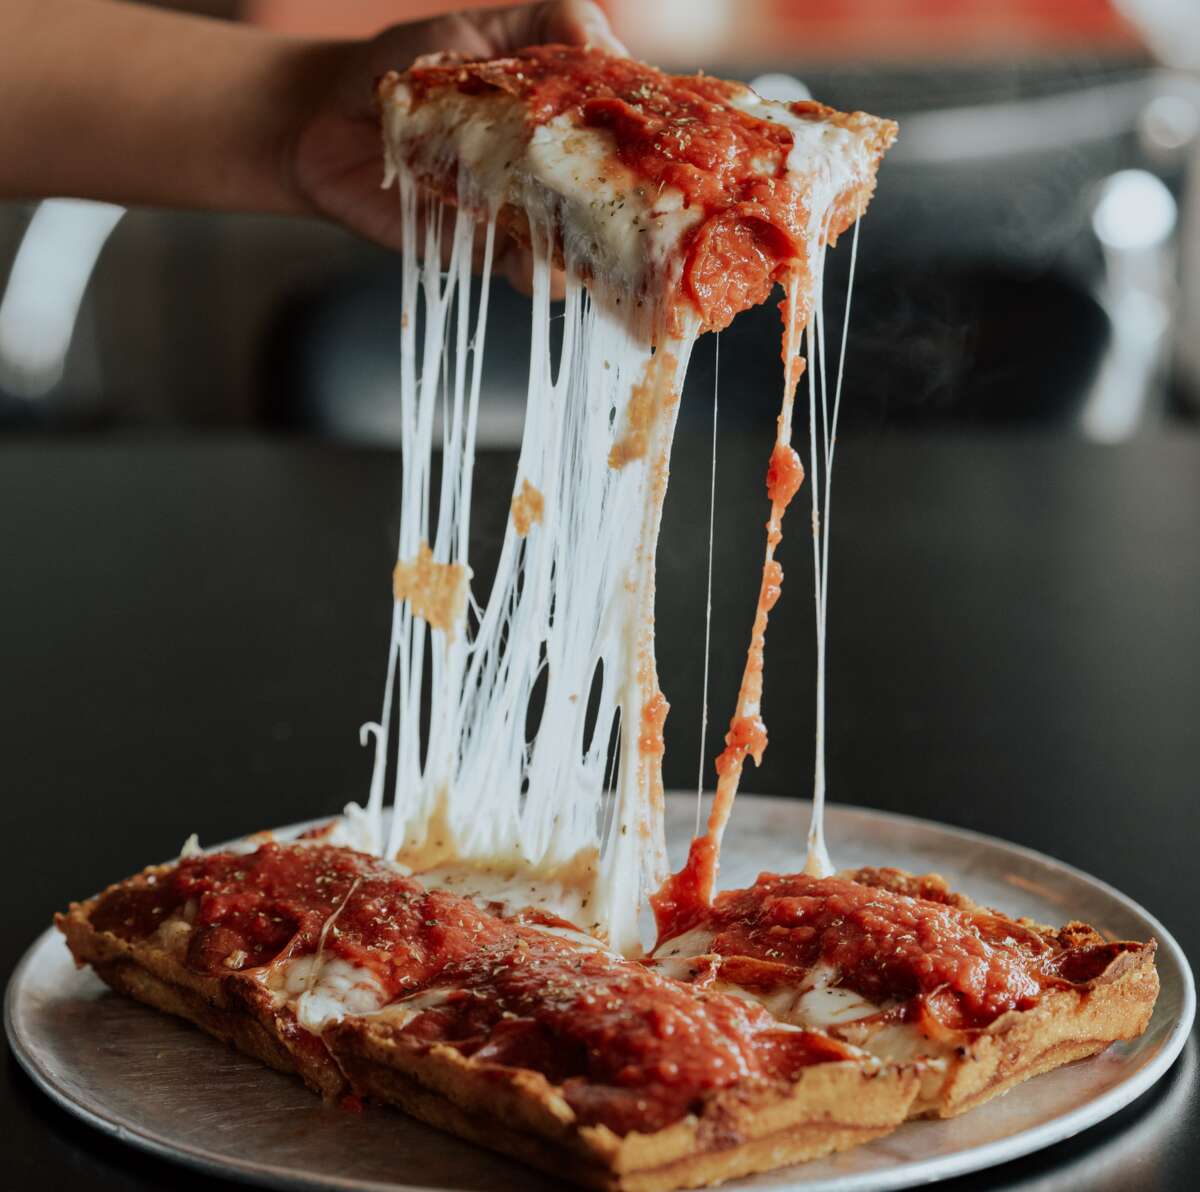 Via 313, an Austin-based brand of Detroit-style pizza, is close to opening its first San Antonio location. 